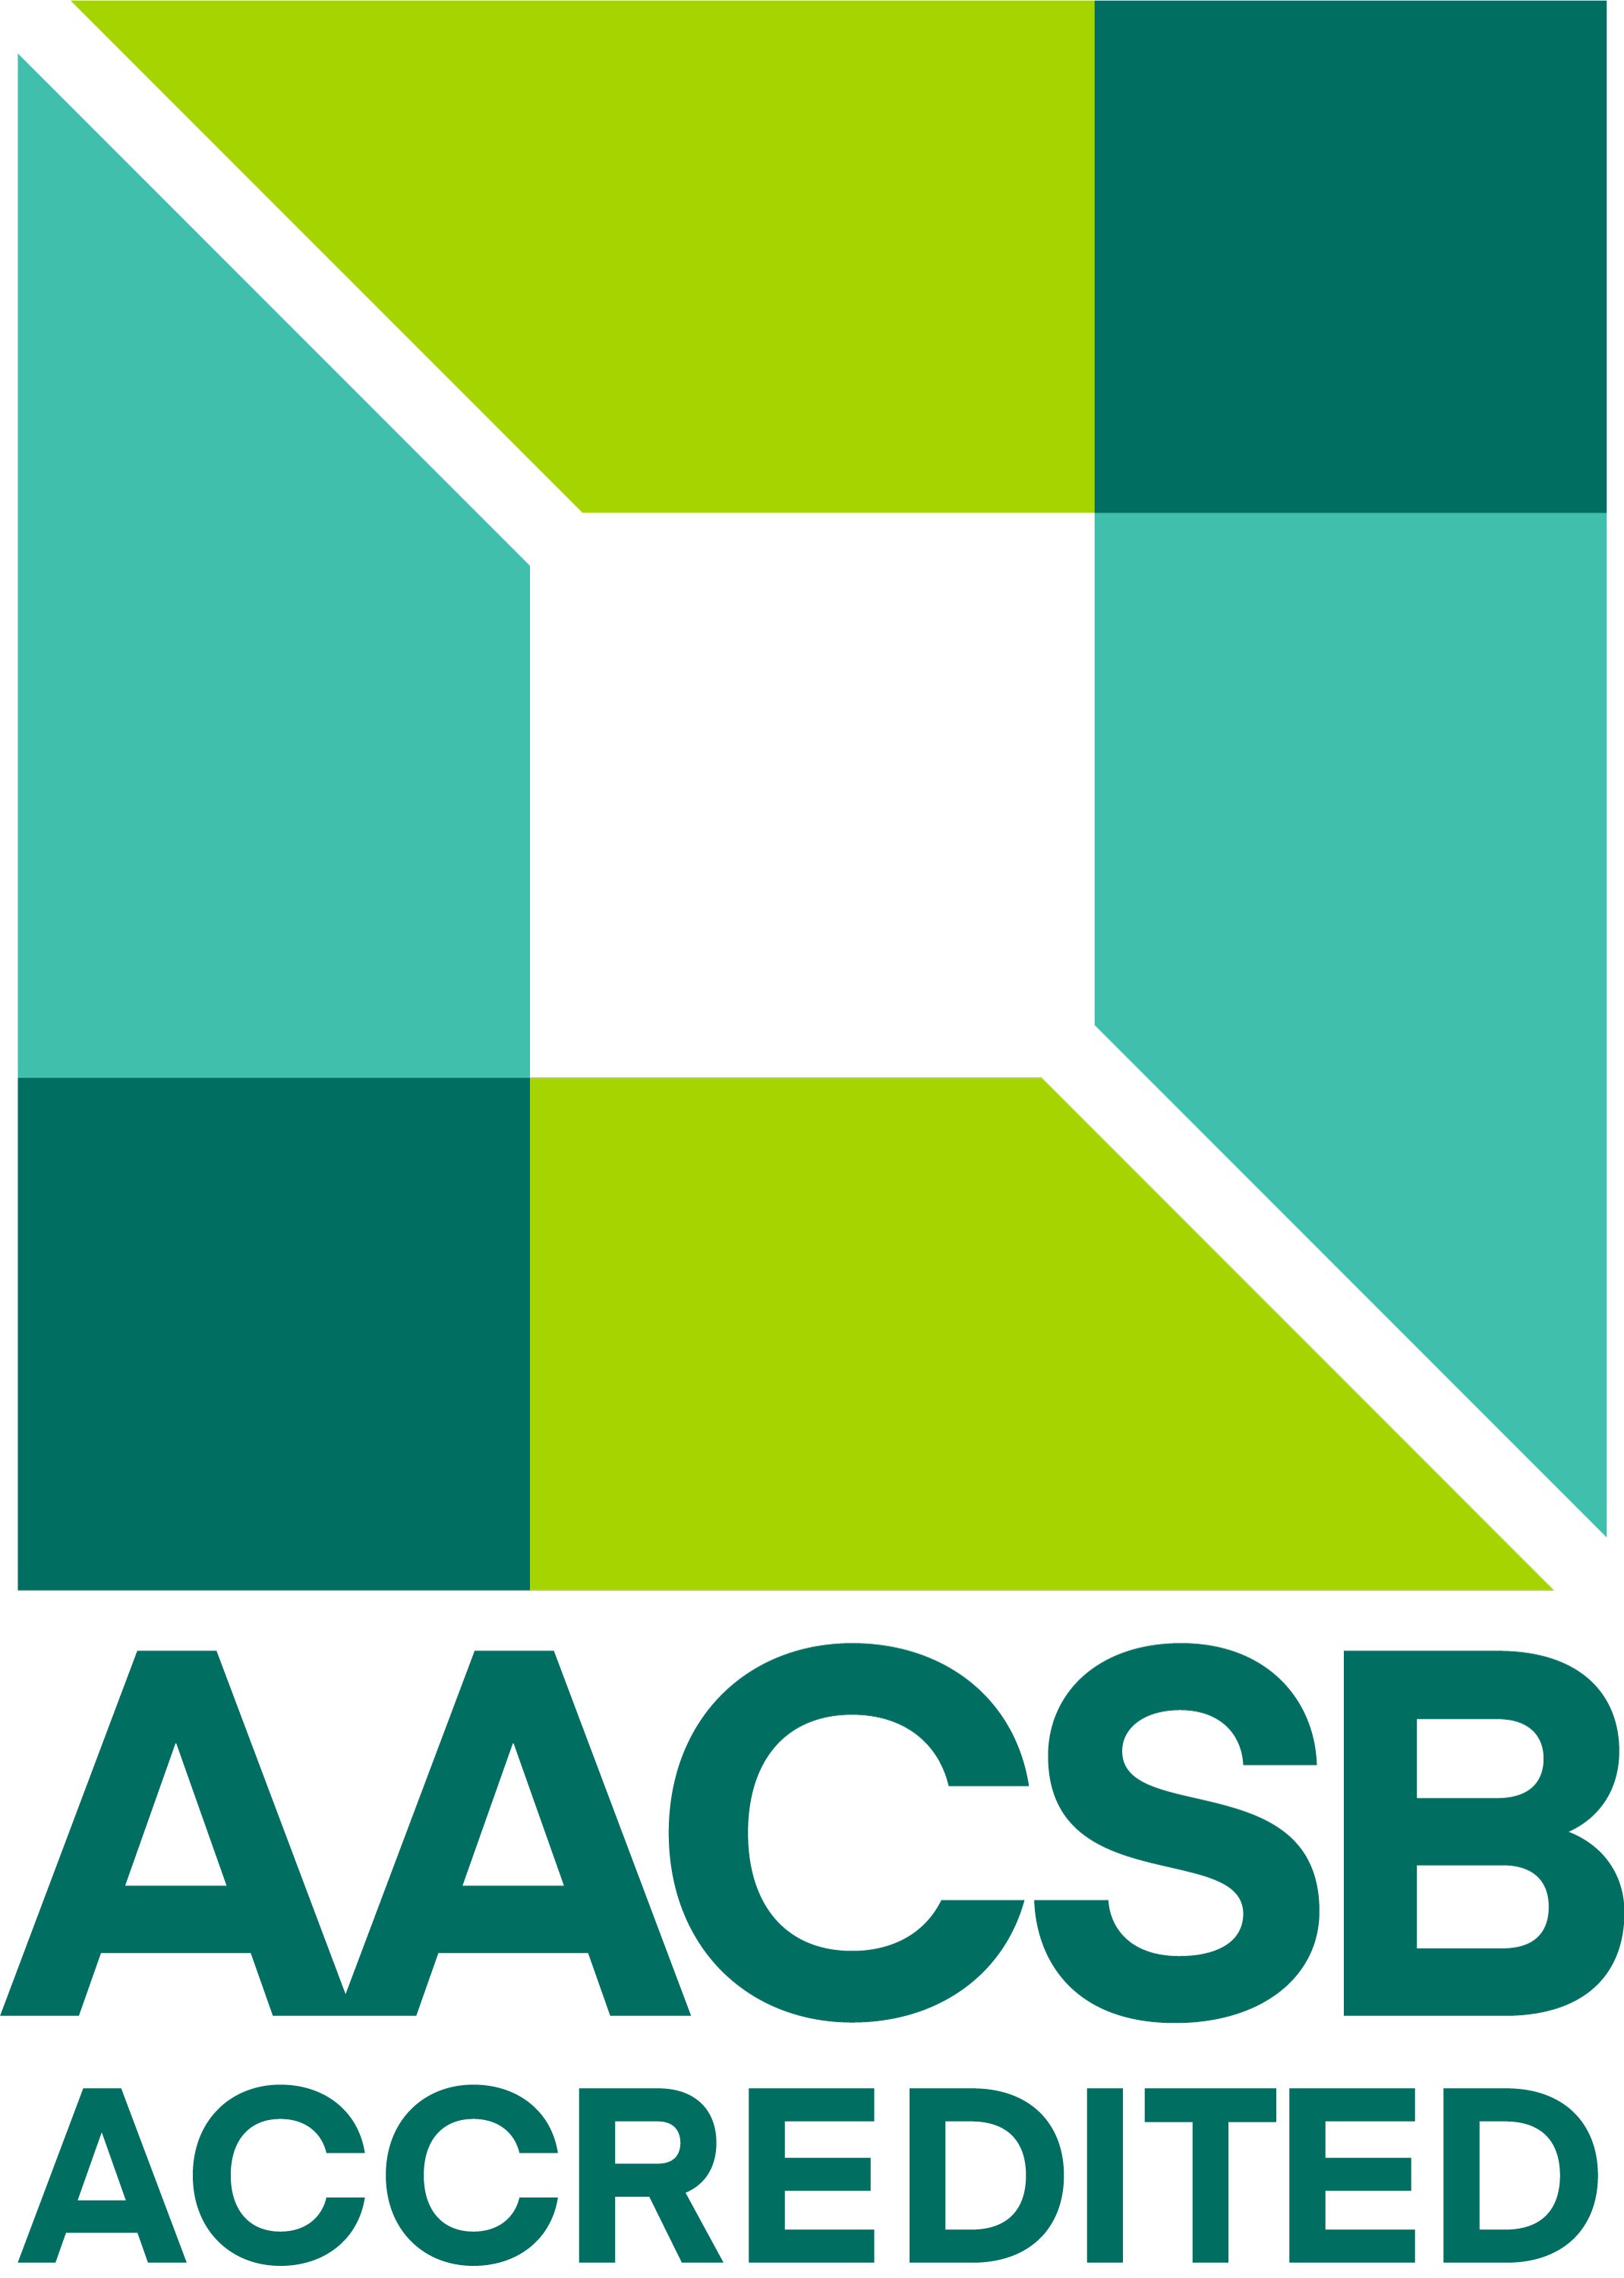 AACSB-logo-accredited-vertical-1400-opt